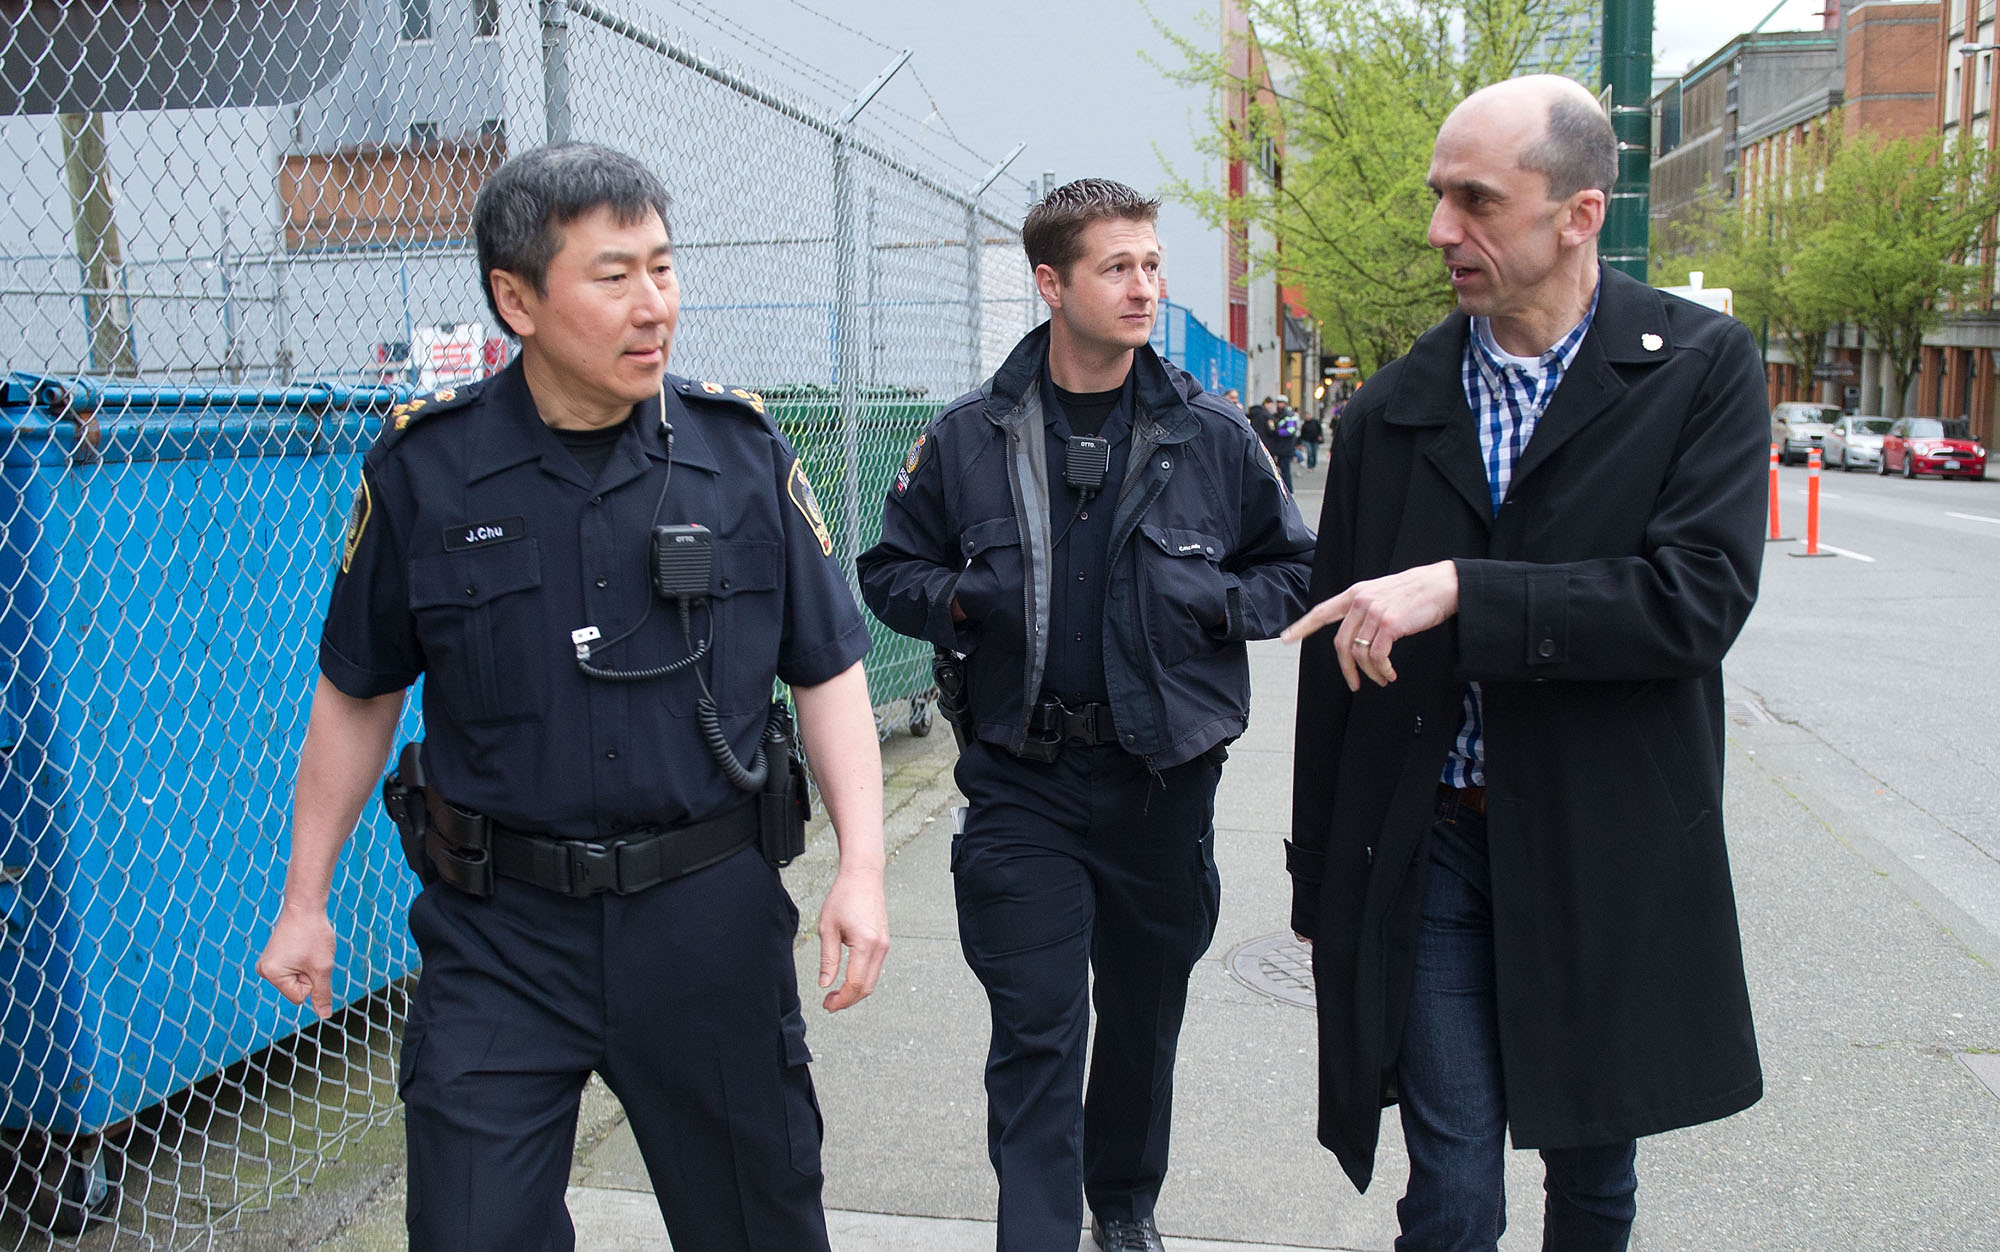 The Honourable Steven Blaney, Vancouver Police Department's Chief  Constable Jim Chu and Constable Ryan Gray